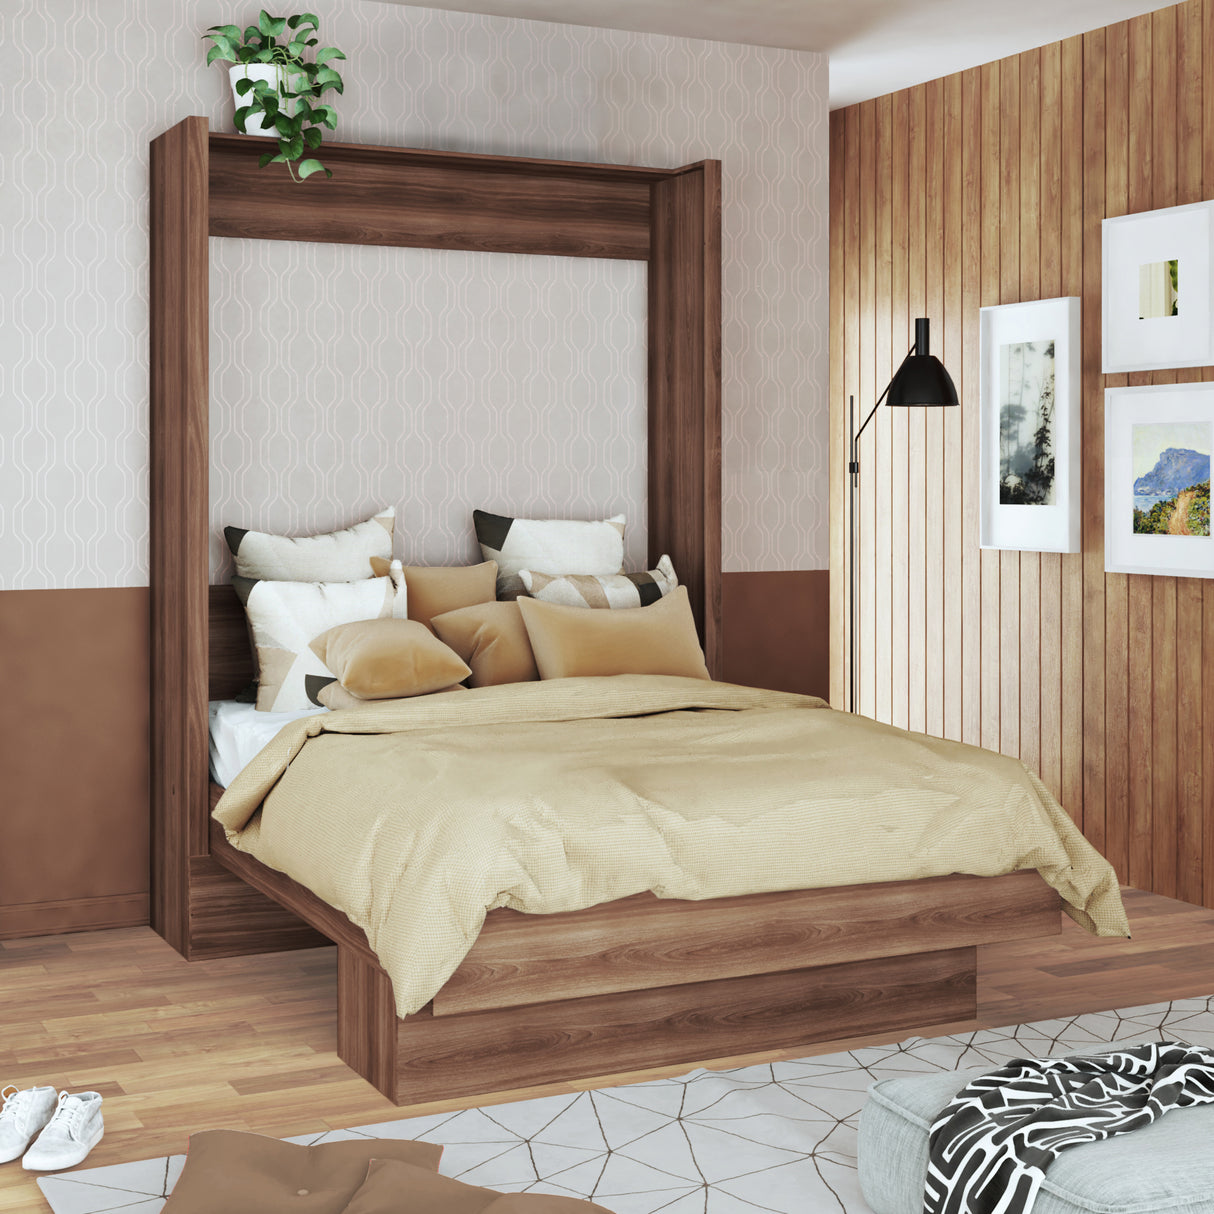 Easy-Lift Queen Murphy Wall Bed in Natural Brown Wood Grain with Shelf